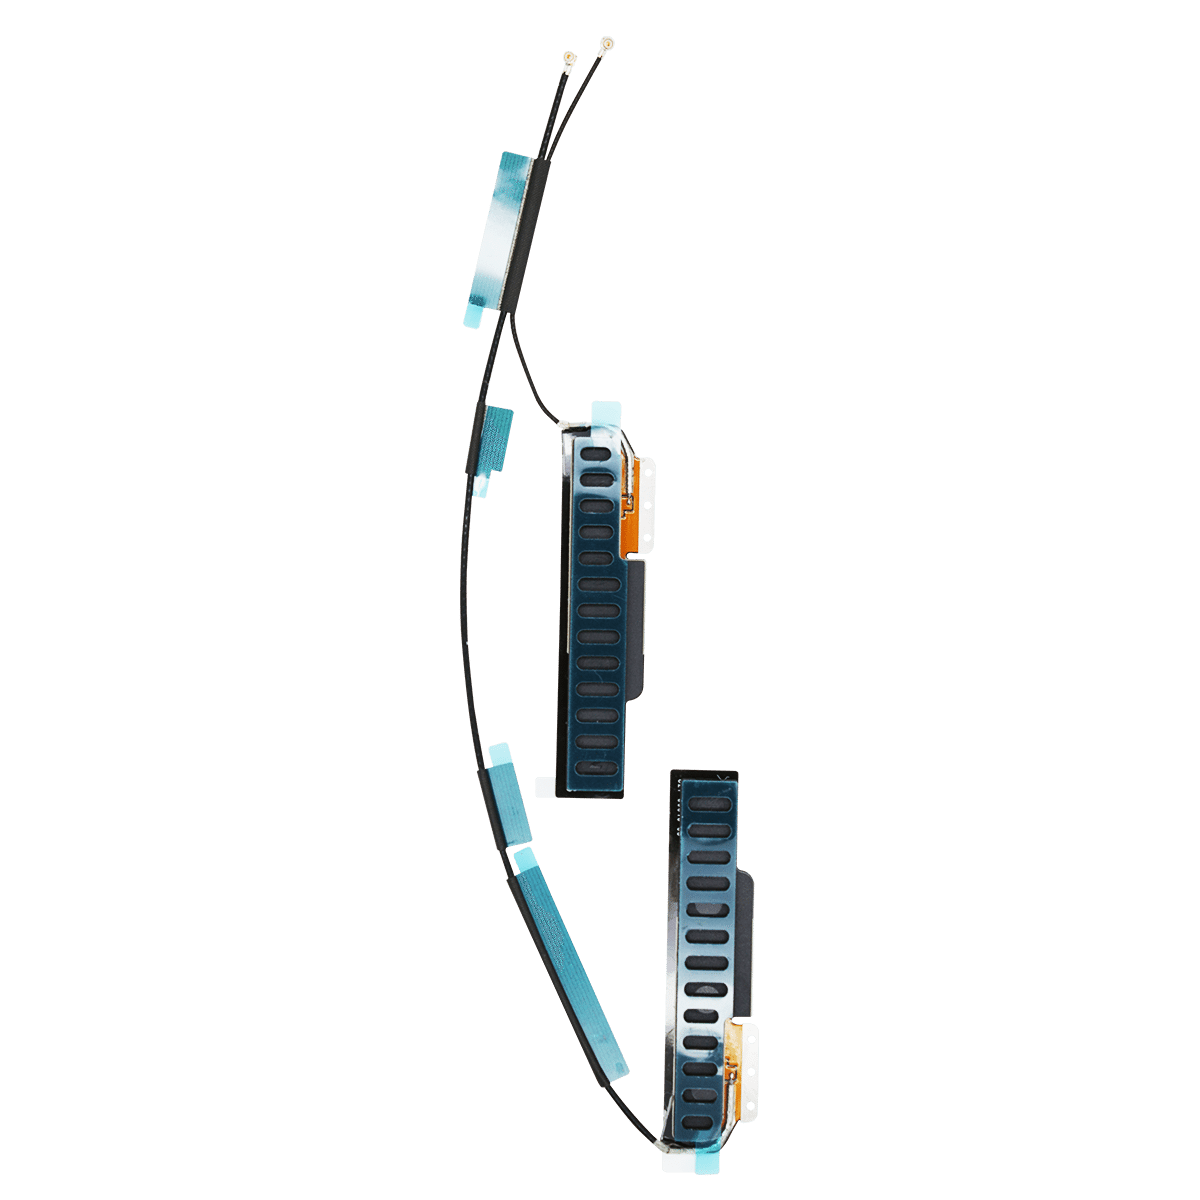 iPad Air 2 WiFi and Flex Cable – Universe